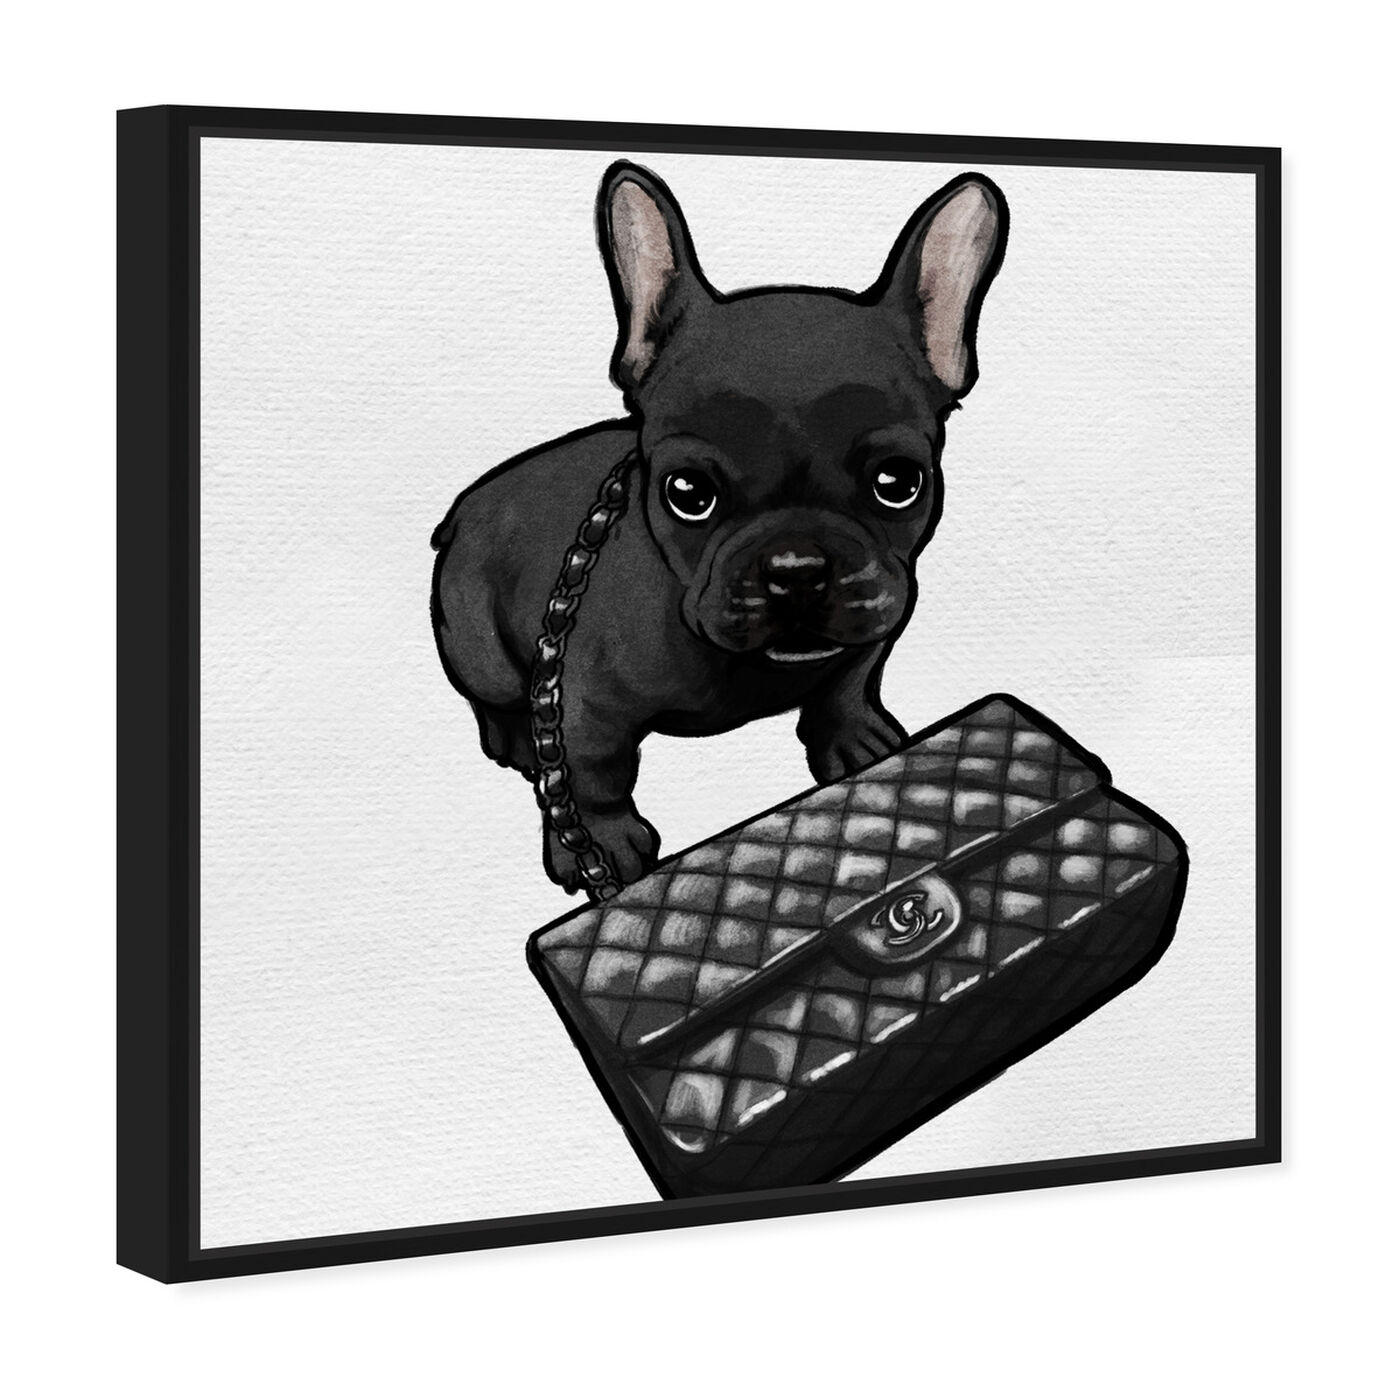 Angled view of Classy Frenchie Noir featuring animals and dogs and puppies art.